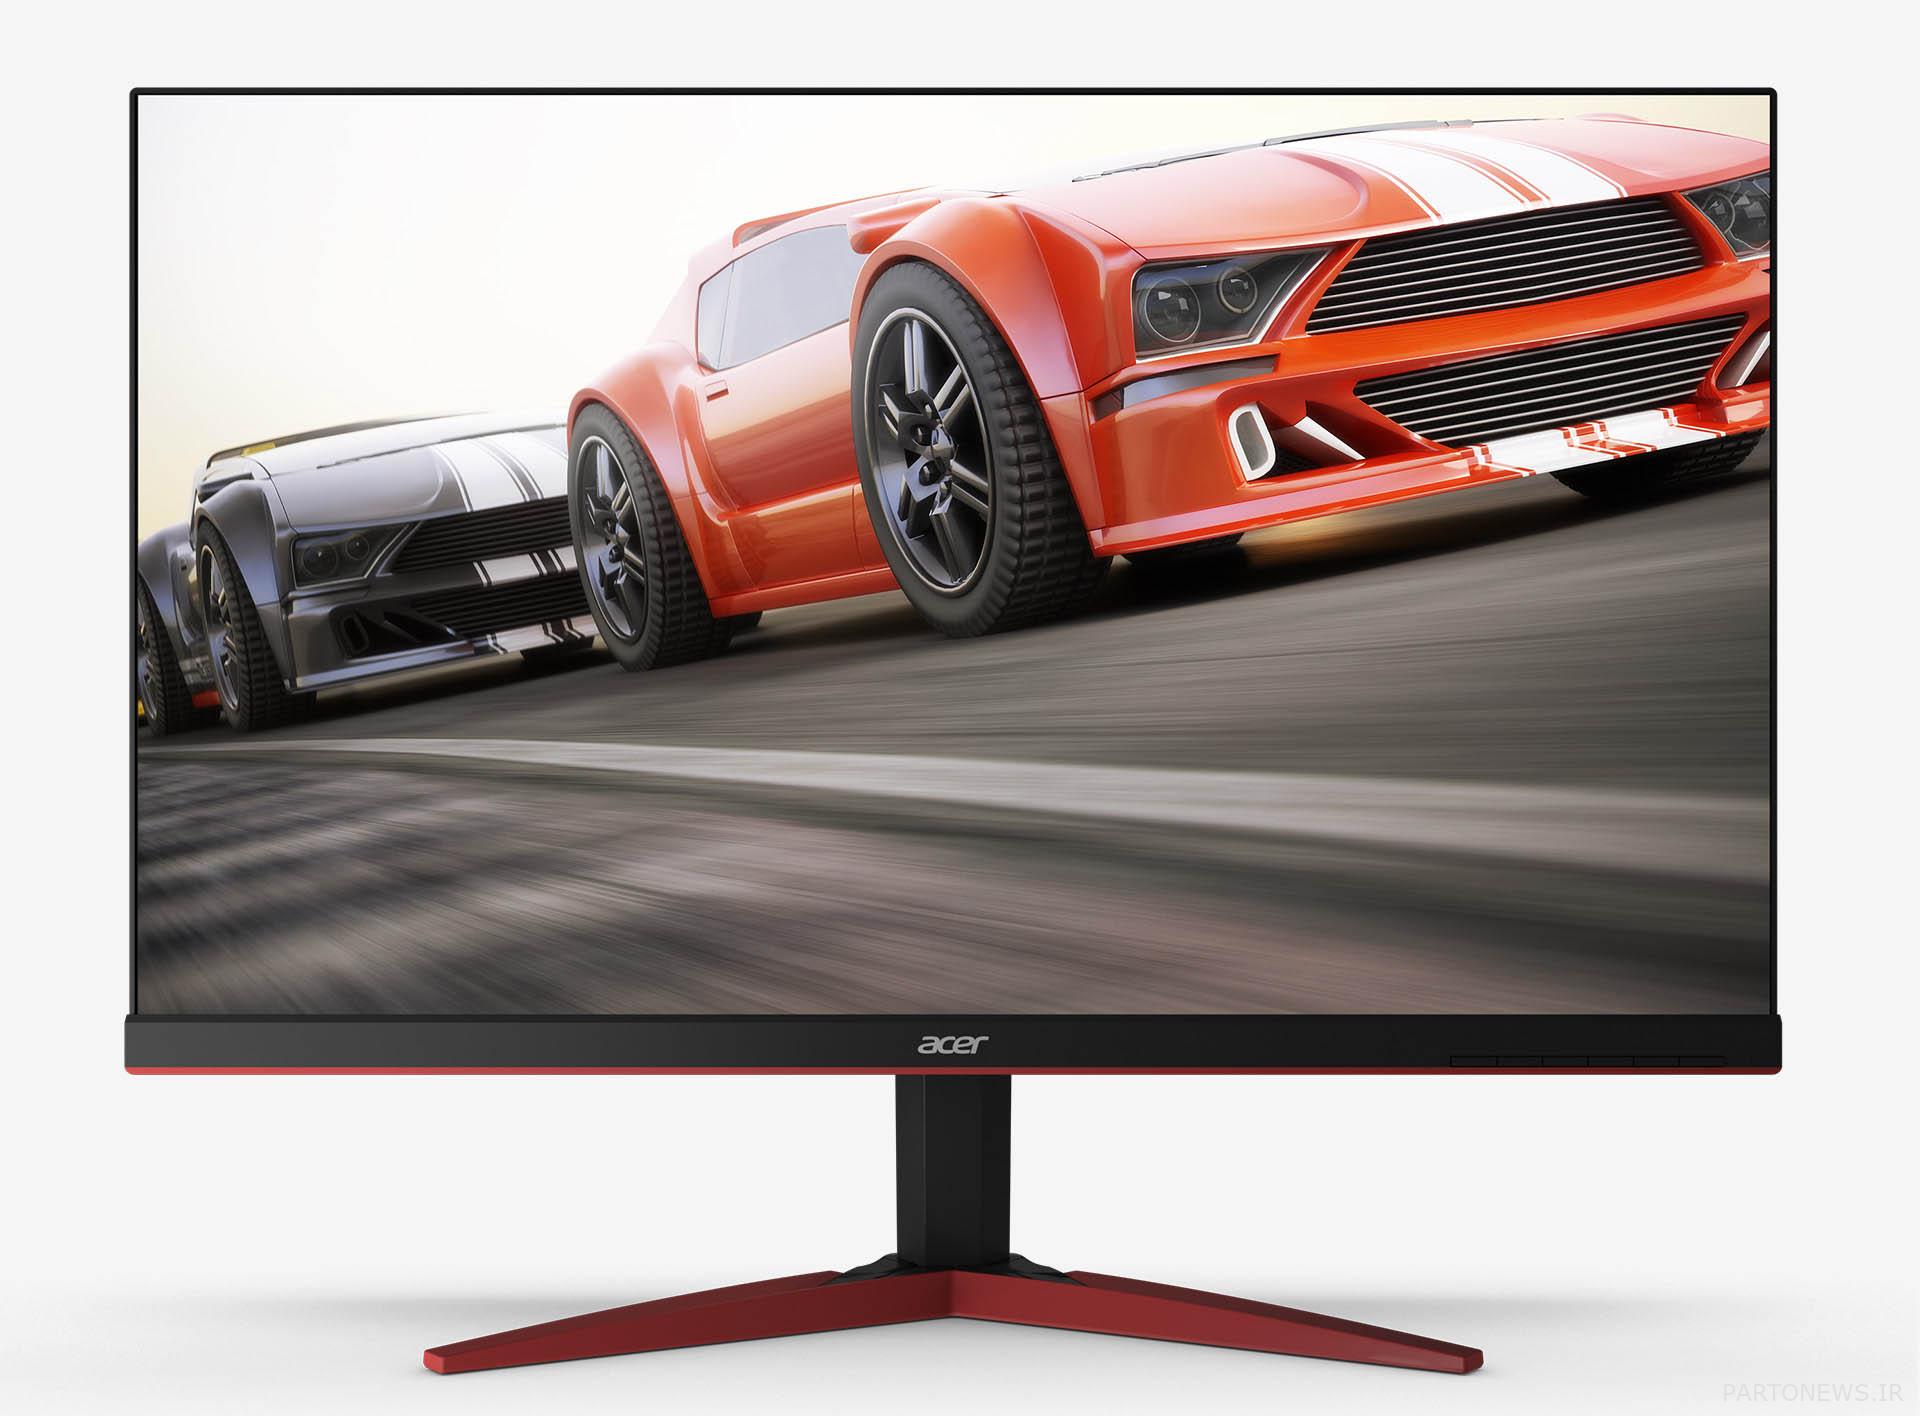 Introducing the KG241QS gaming monitor from Acer